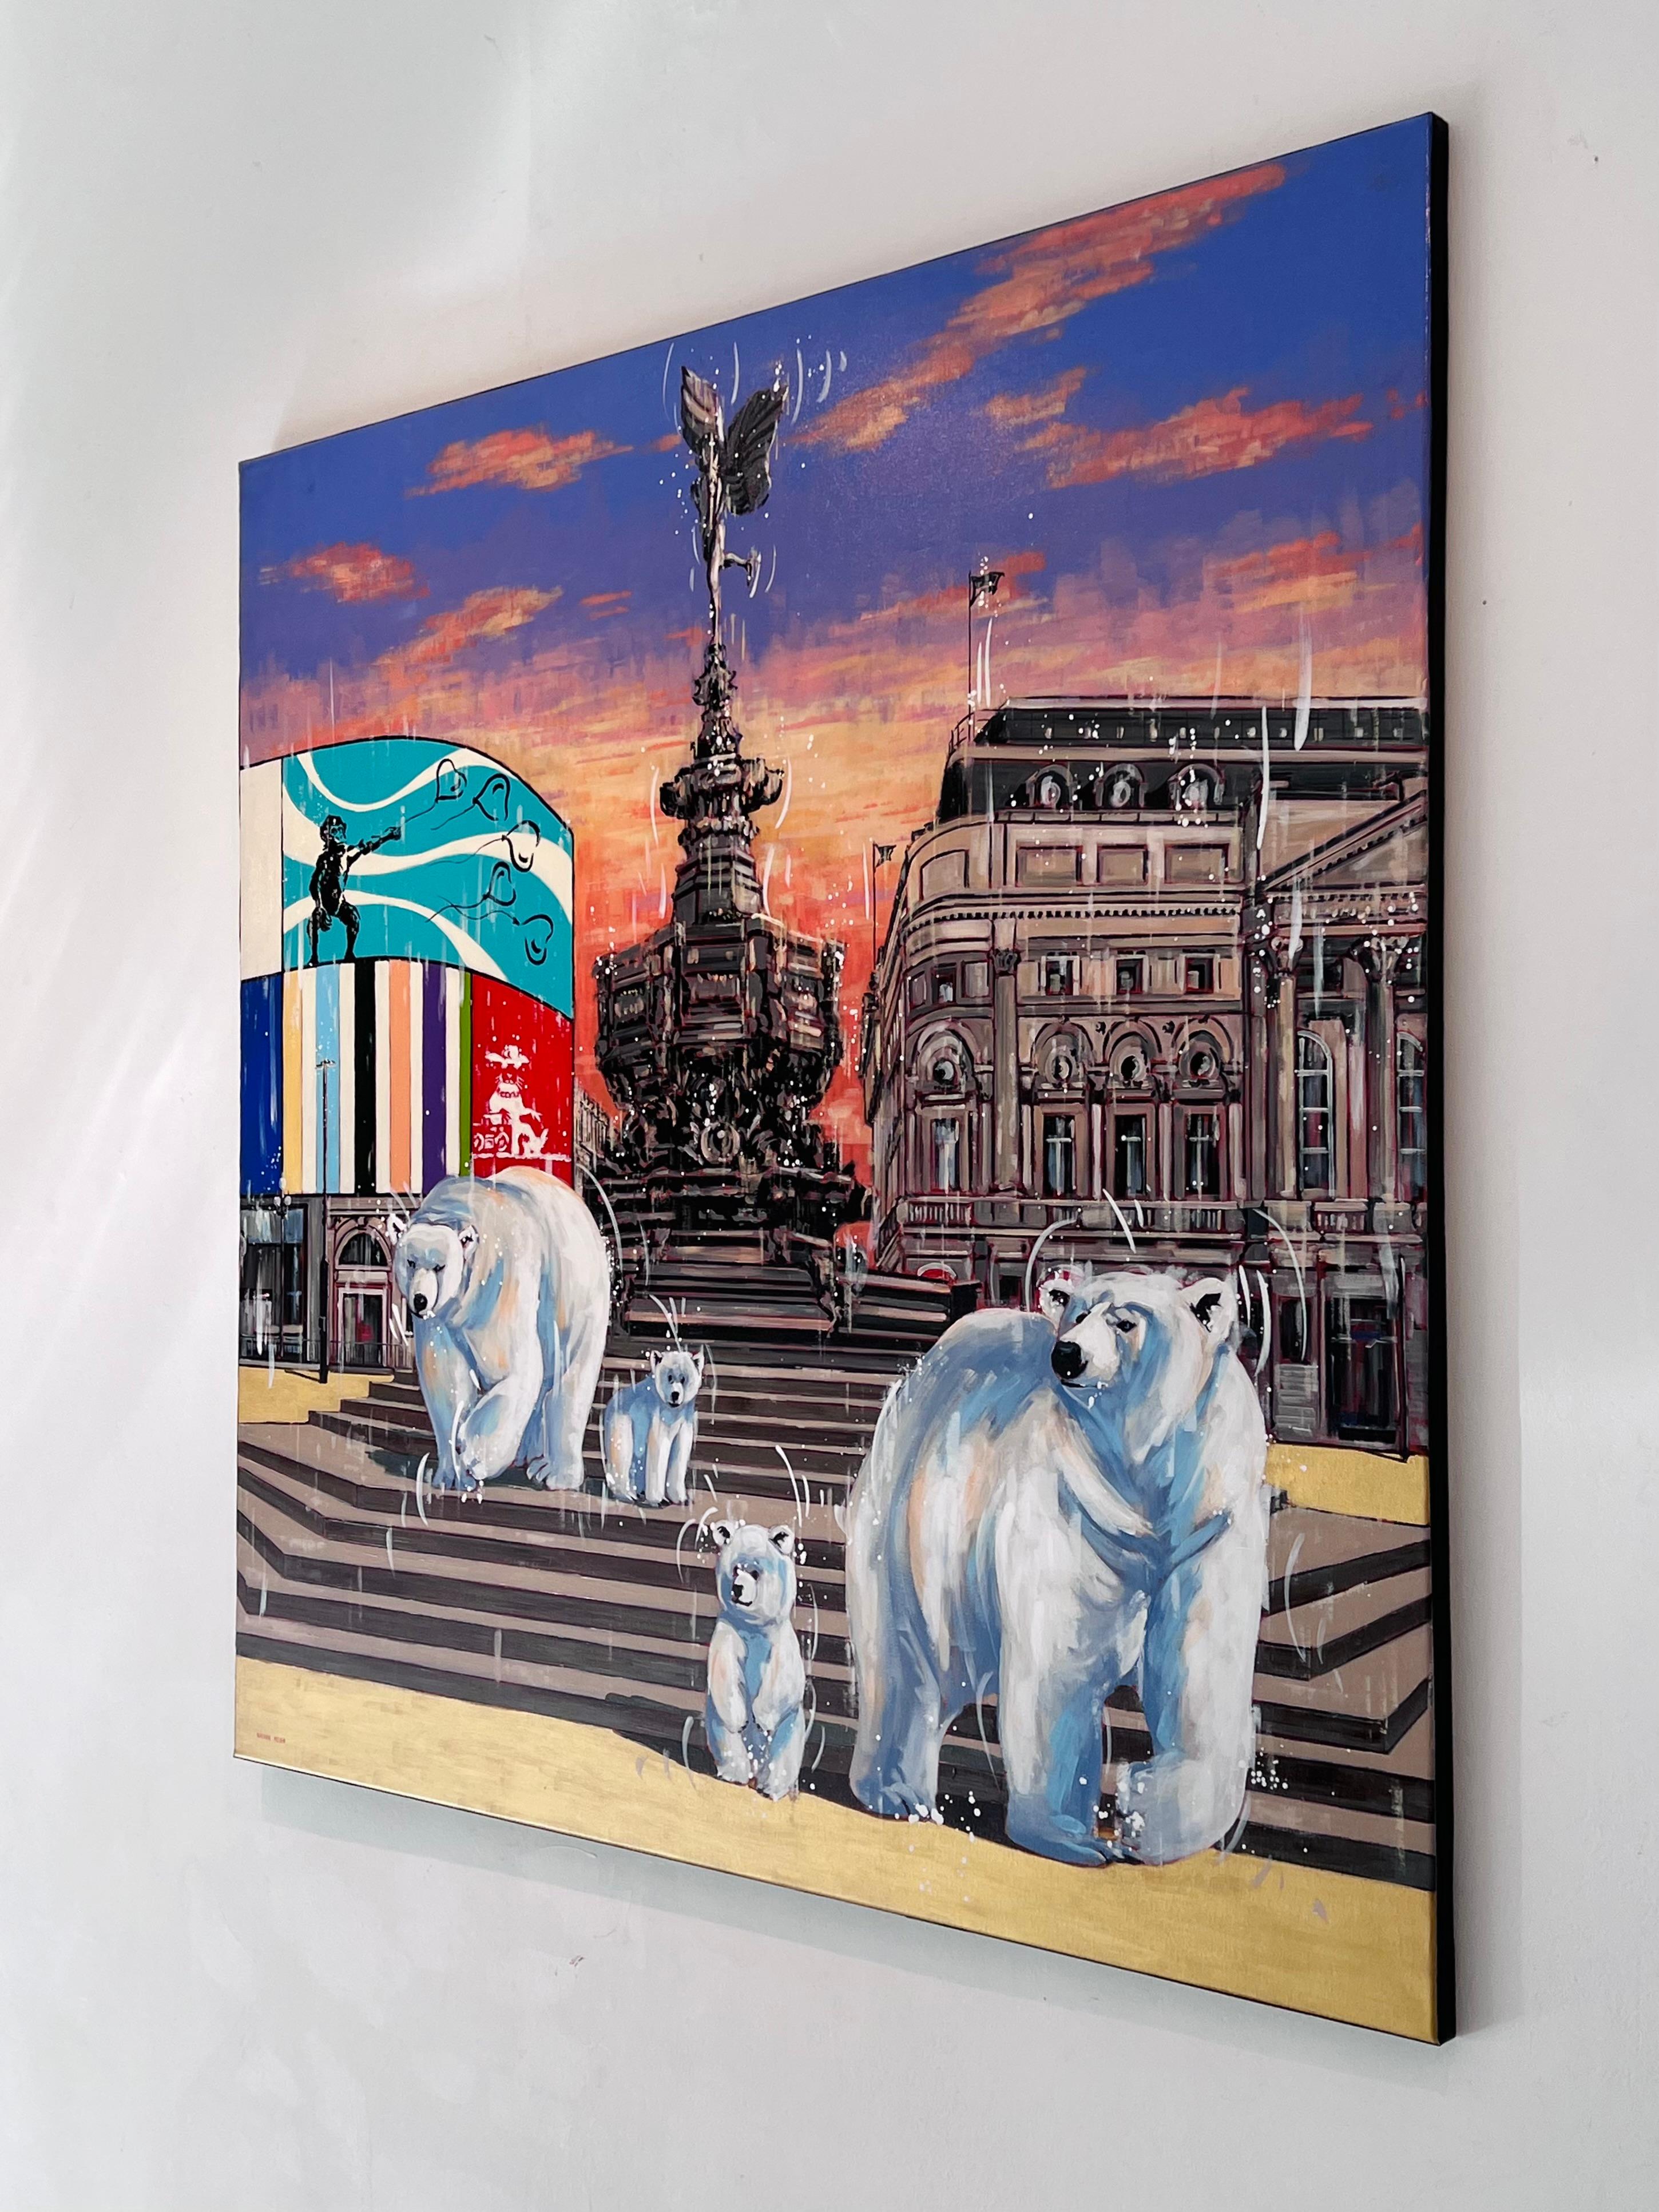 In “Shaftesbury Fountain,” Nathan Neven reimagines a beloved London landmark with a whimsical twist, blending reality with playful fantasy. The iconic Shaftesbury Fountain becomes the stage for an enchanting scene where two adult polar bears,